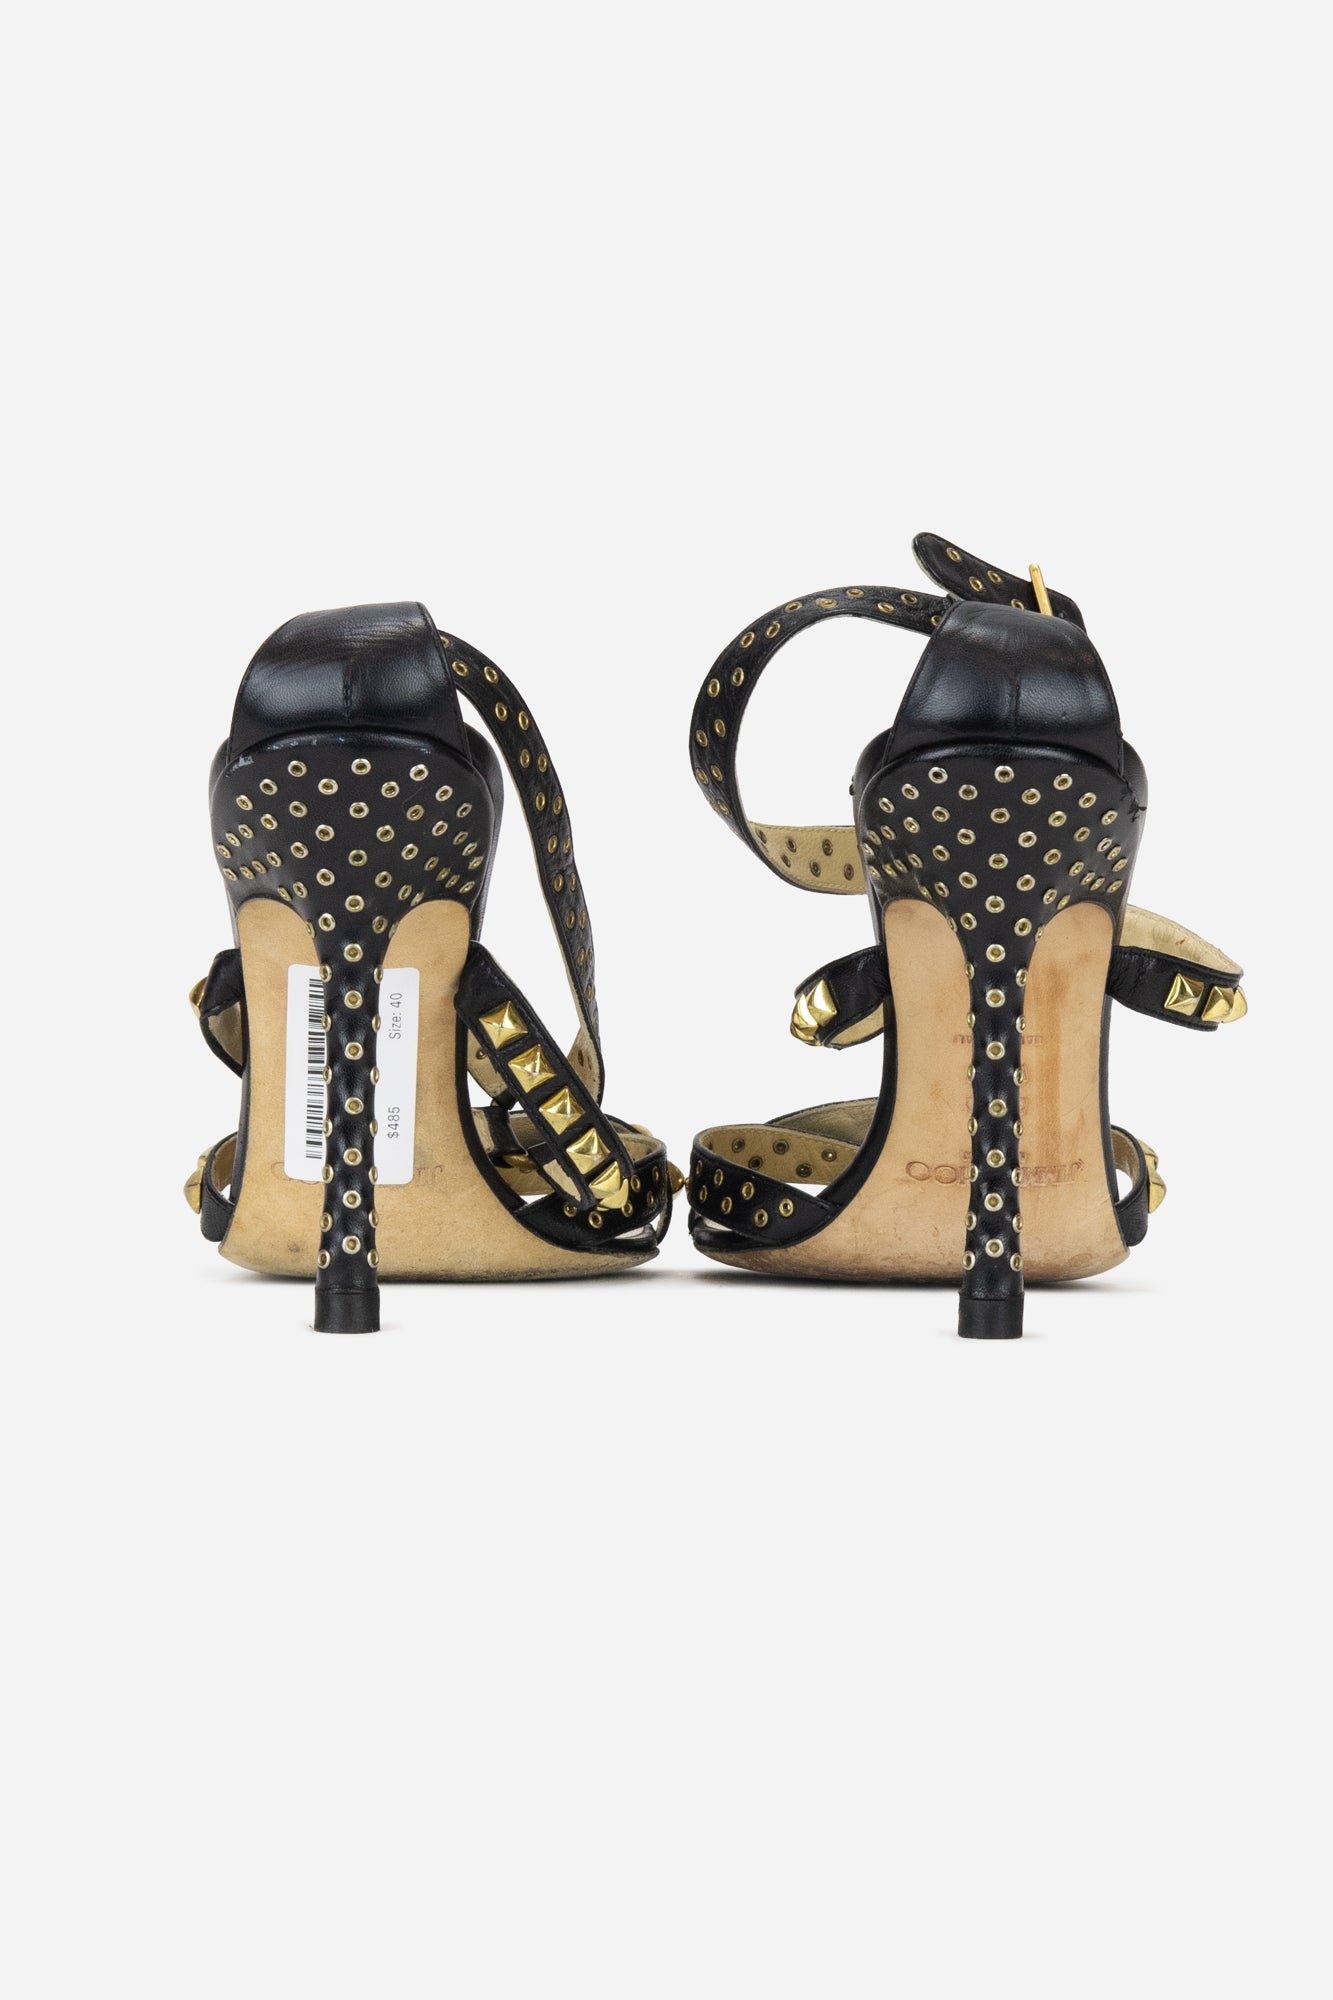 Black Leather Strappy Sandals with Gold Studded Details - So Over It Luxury Consignment